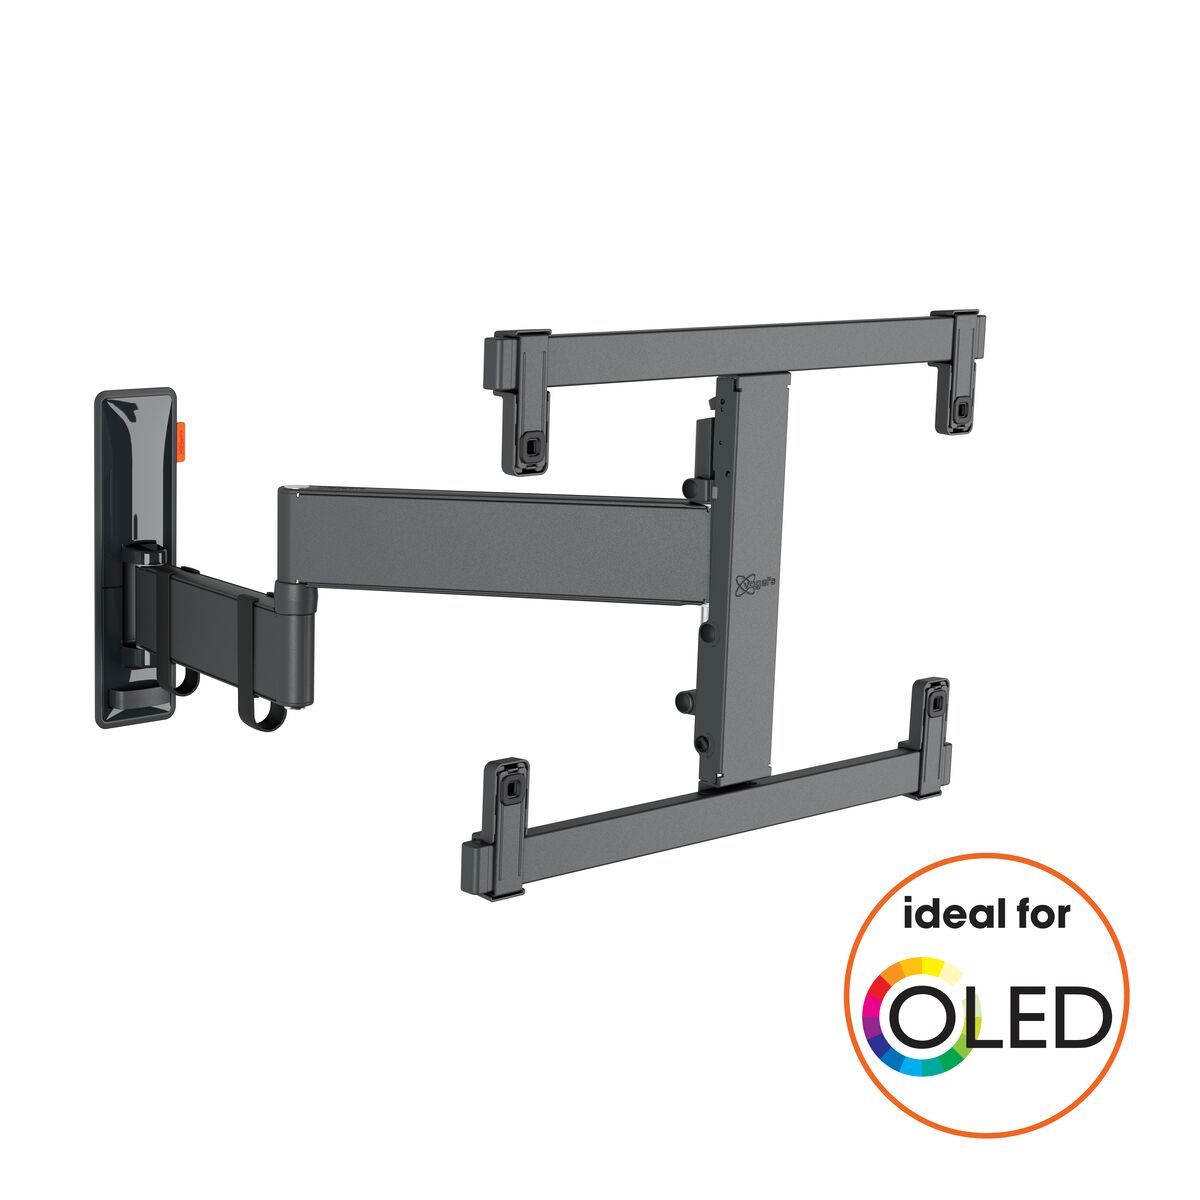 Vogel's TVM 3465 Full-Motion TV Wall Mount - Suitable for 32 up to 65 inch TVs - Full motion (up to 180°) swivel - Tilt up to 20° - Promo